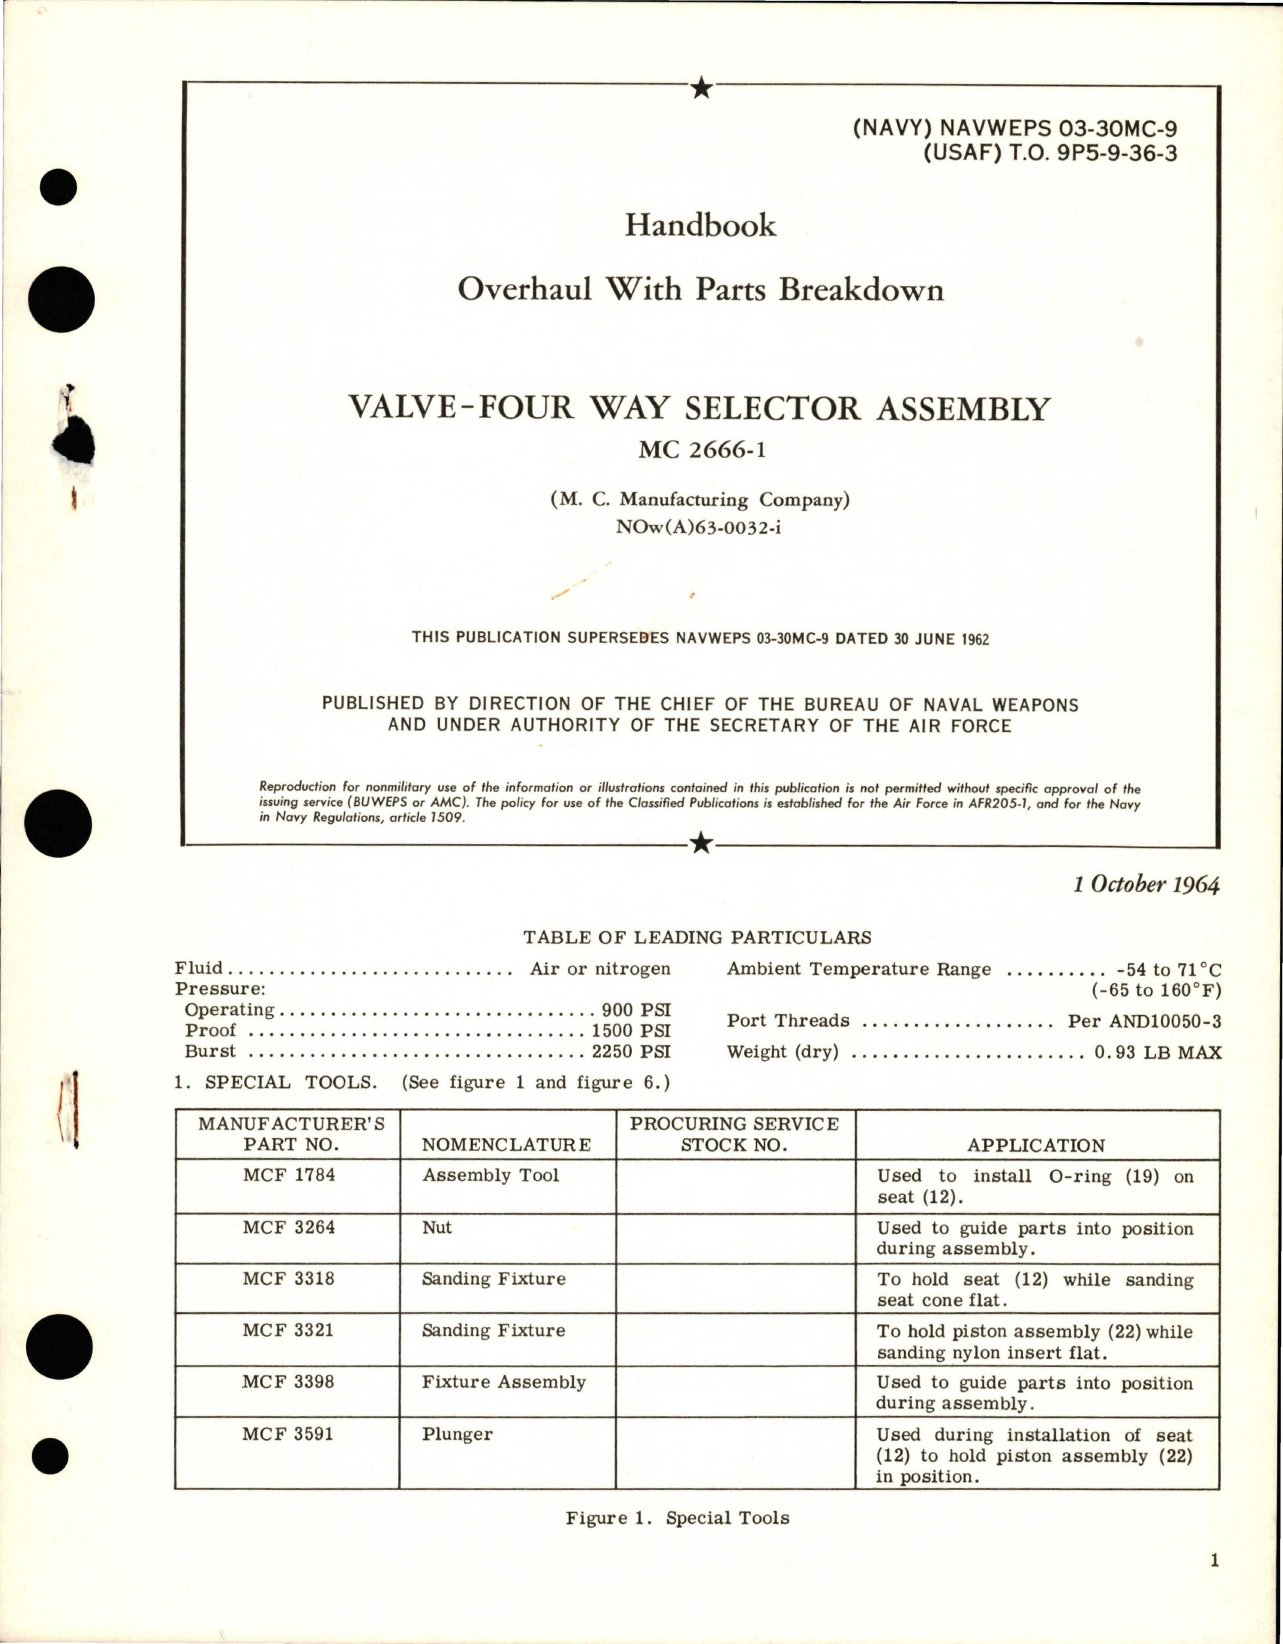 Sample page 1 from AirCorps Library document: Overhaul with Parts Breakdown for Four-Way Selector Assembly Valve - MC 2666-1